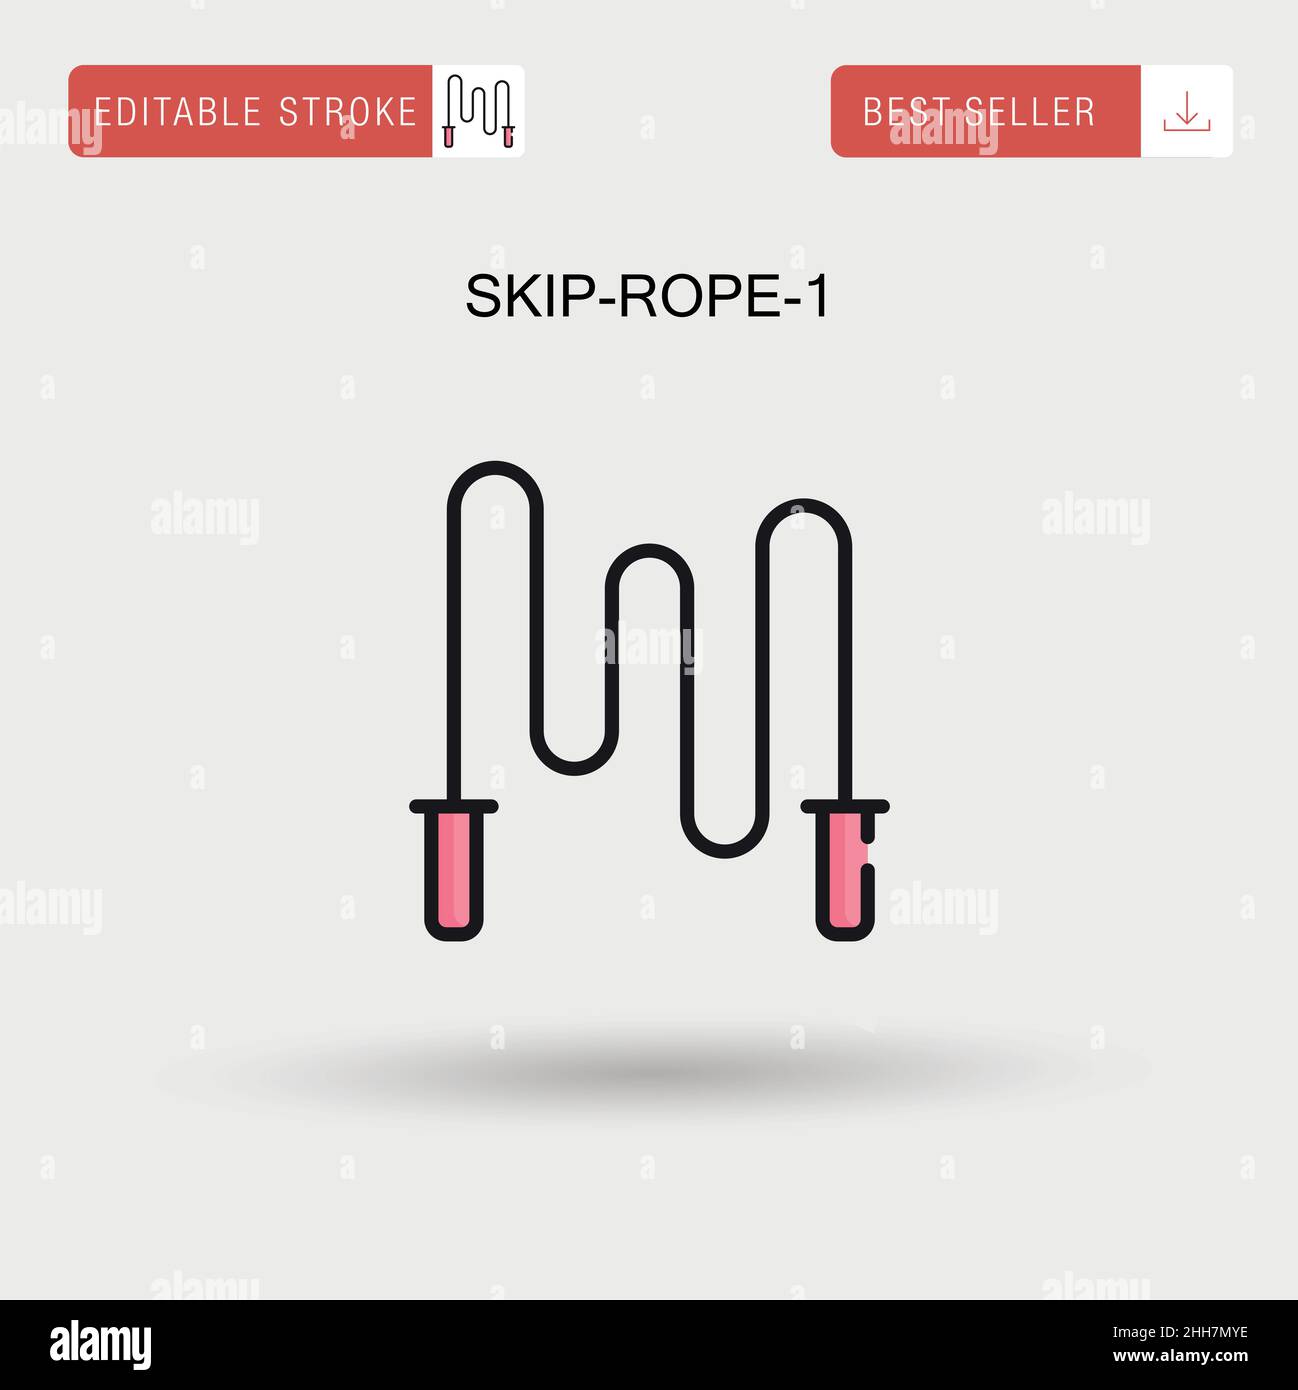 Skip-rope-1 Simple vector icon. Stock Vector